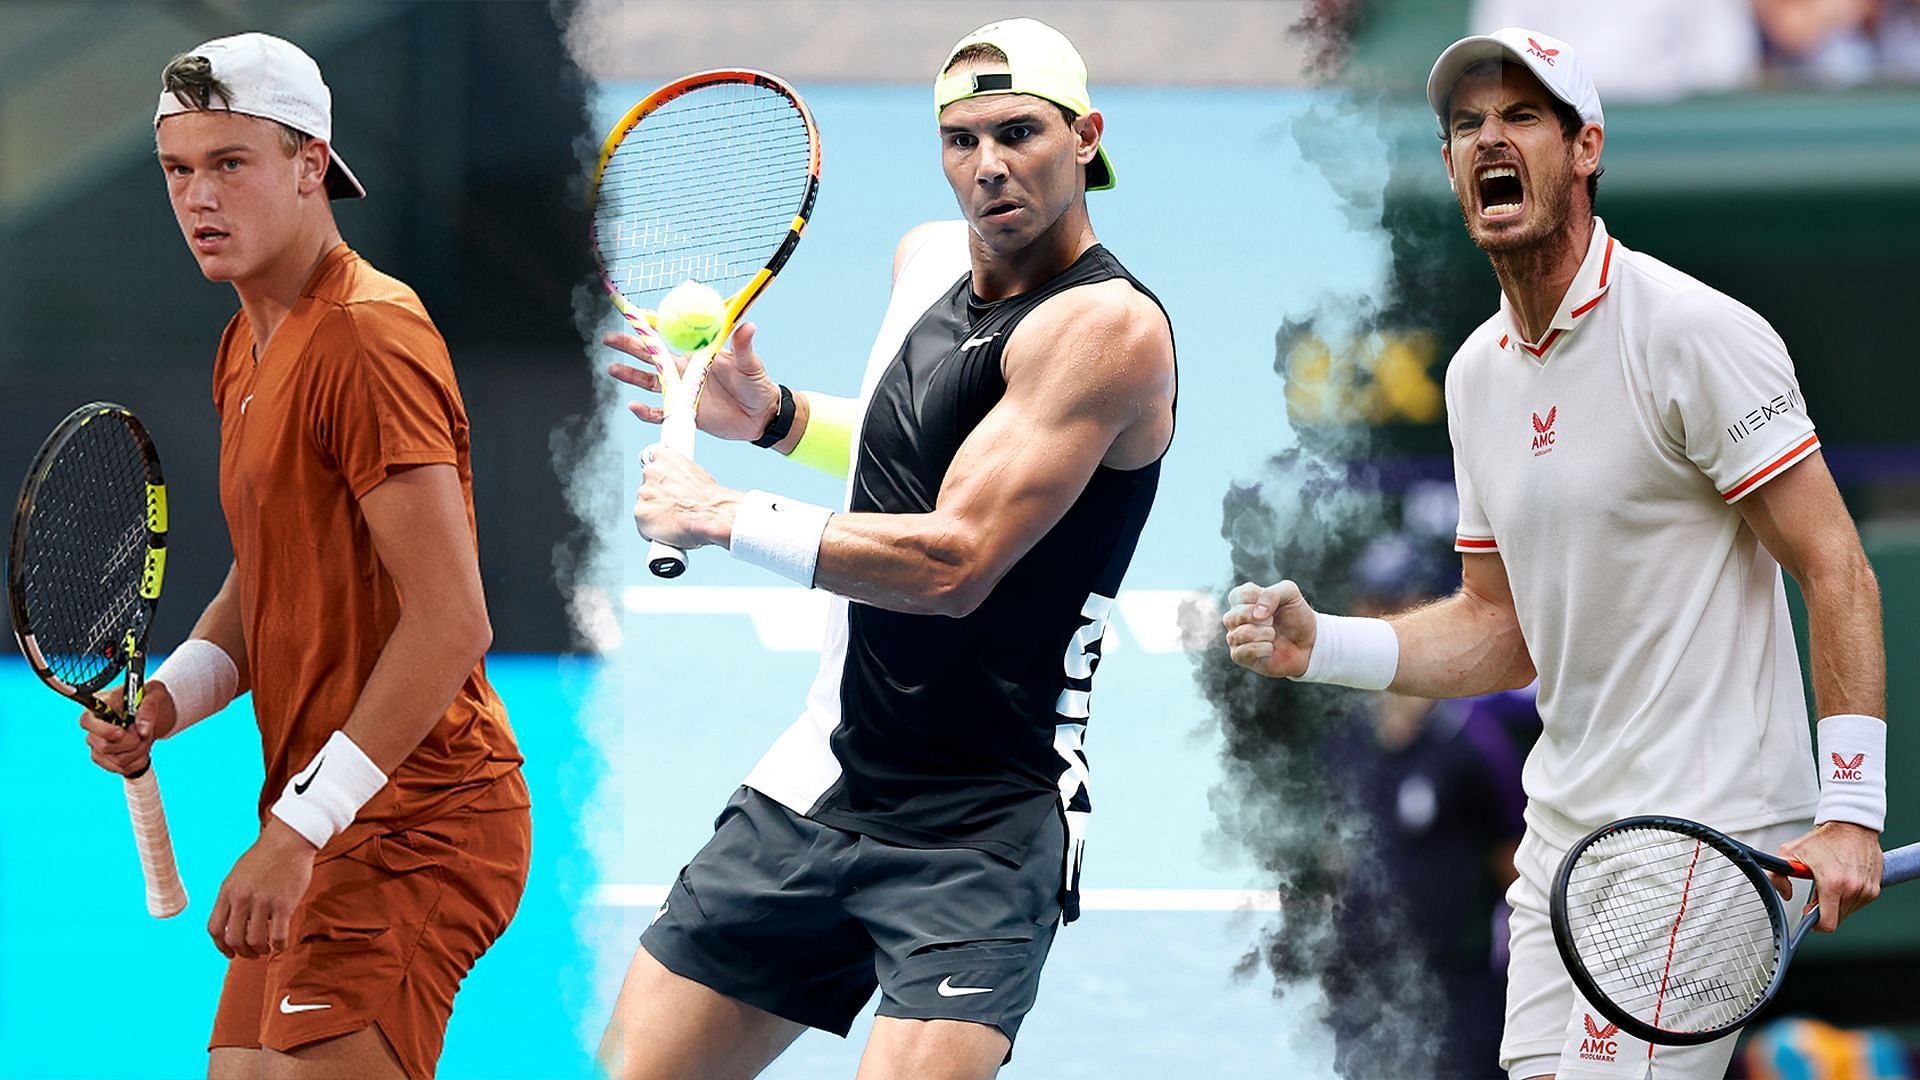 Rafael Nadal and Andy Murray could face each other in the semifinals 